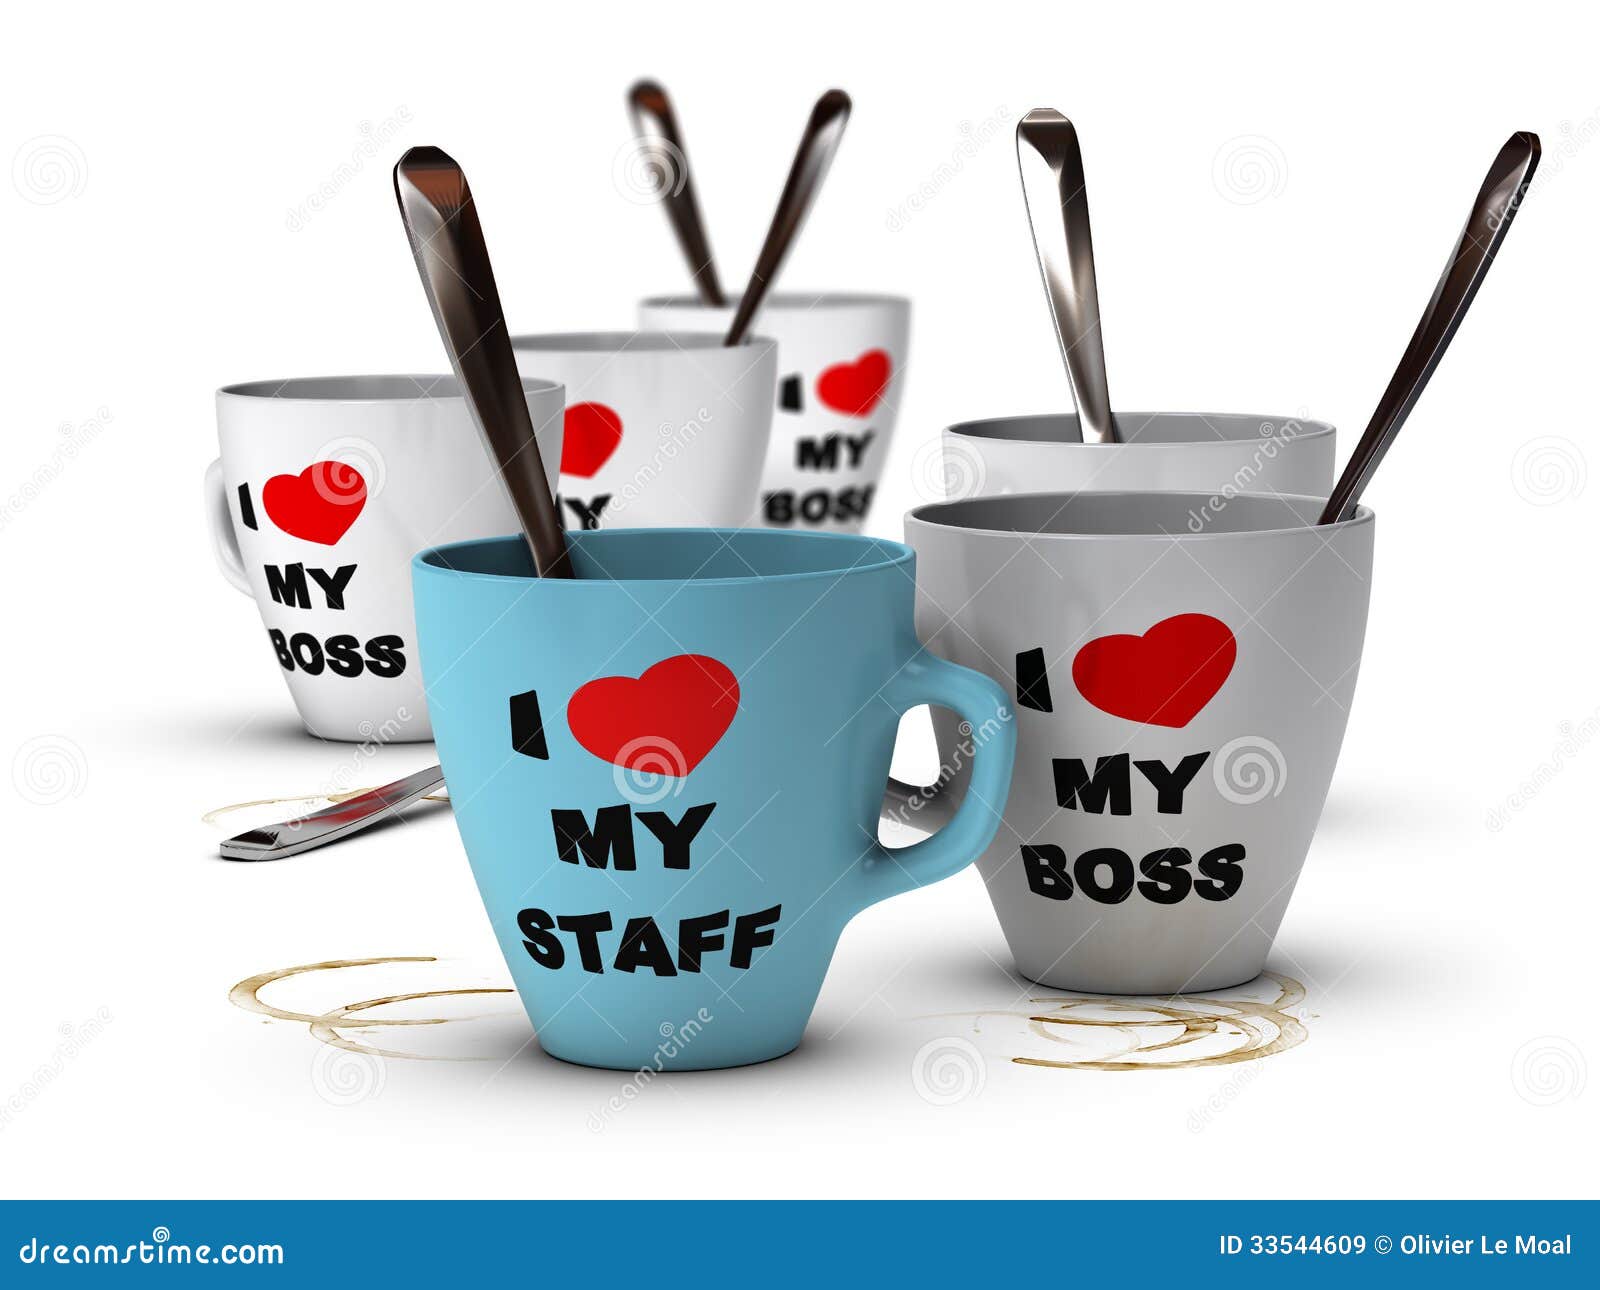 employee relations clipart - photo #14